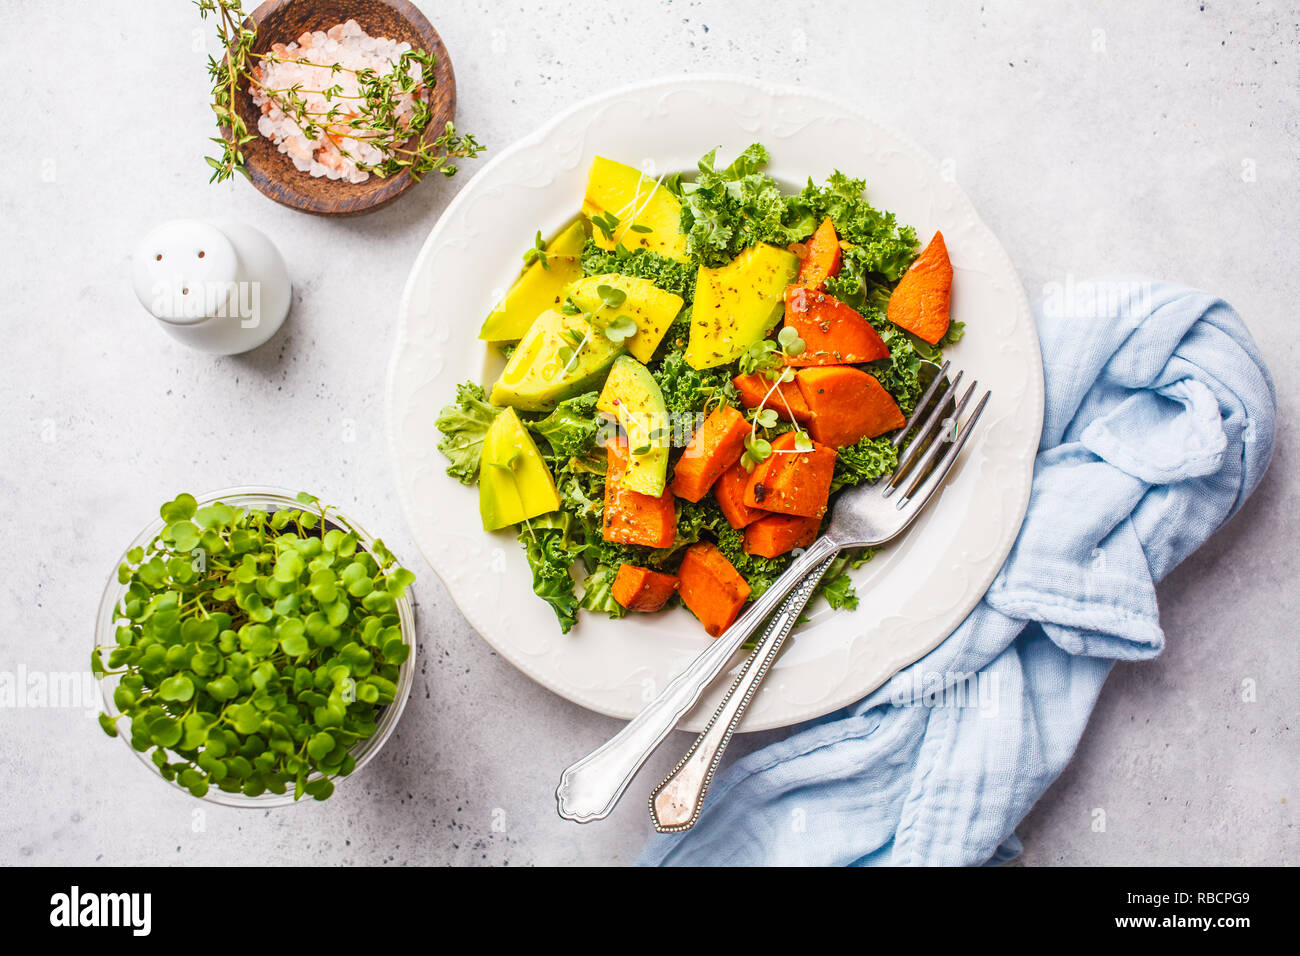 Healthy green kale salad with avocado and baked sweet potatoes. Plant based diet concept, detox food. Top view, white background. Stock Photo